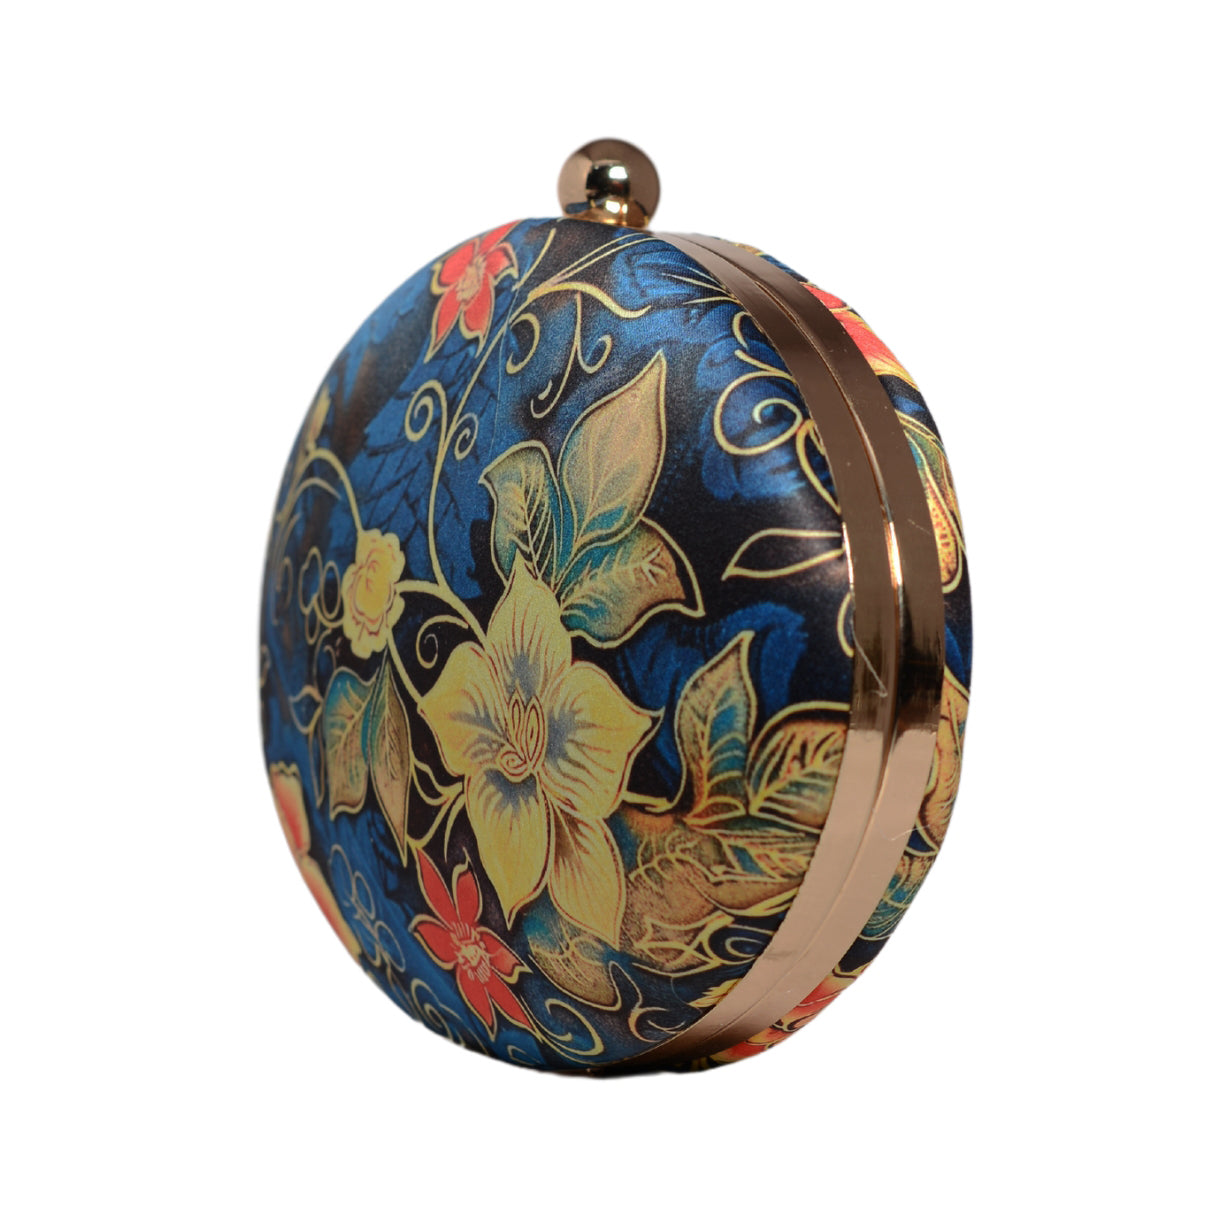 Blue And Yellow Floral Printed Oval Clutch